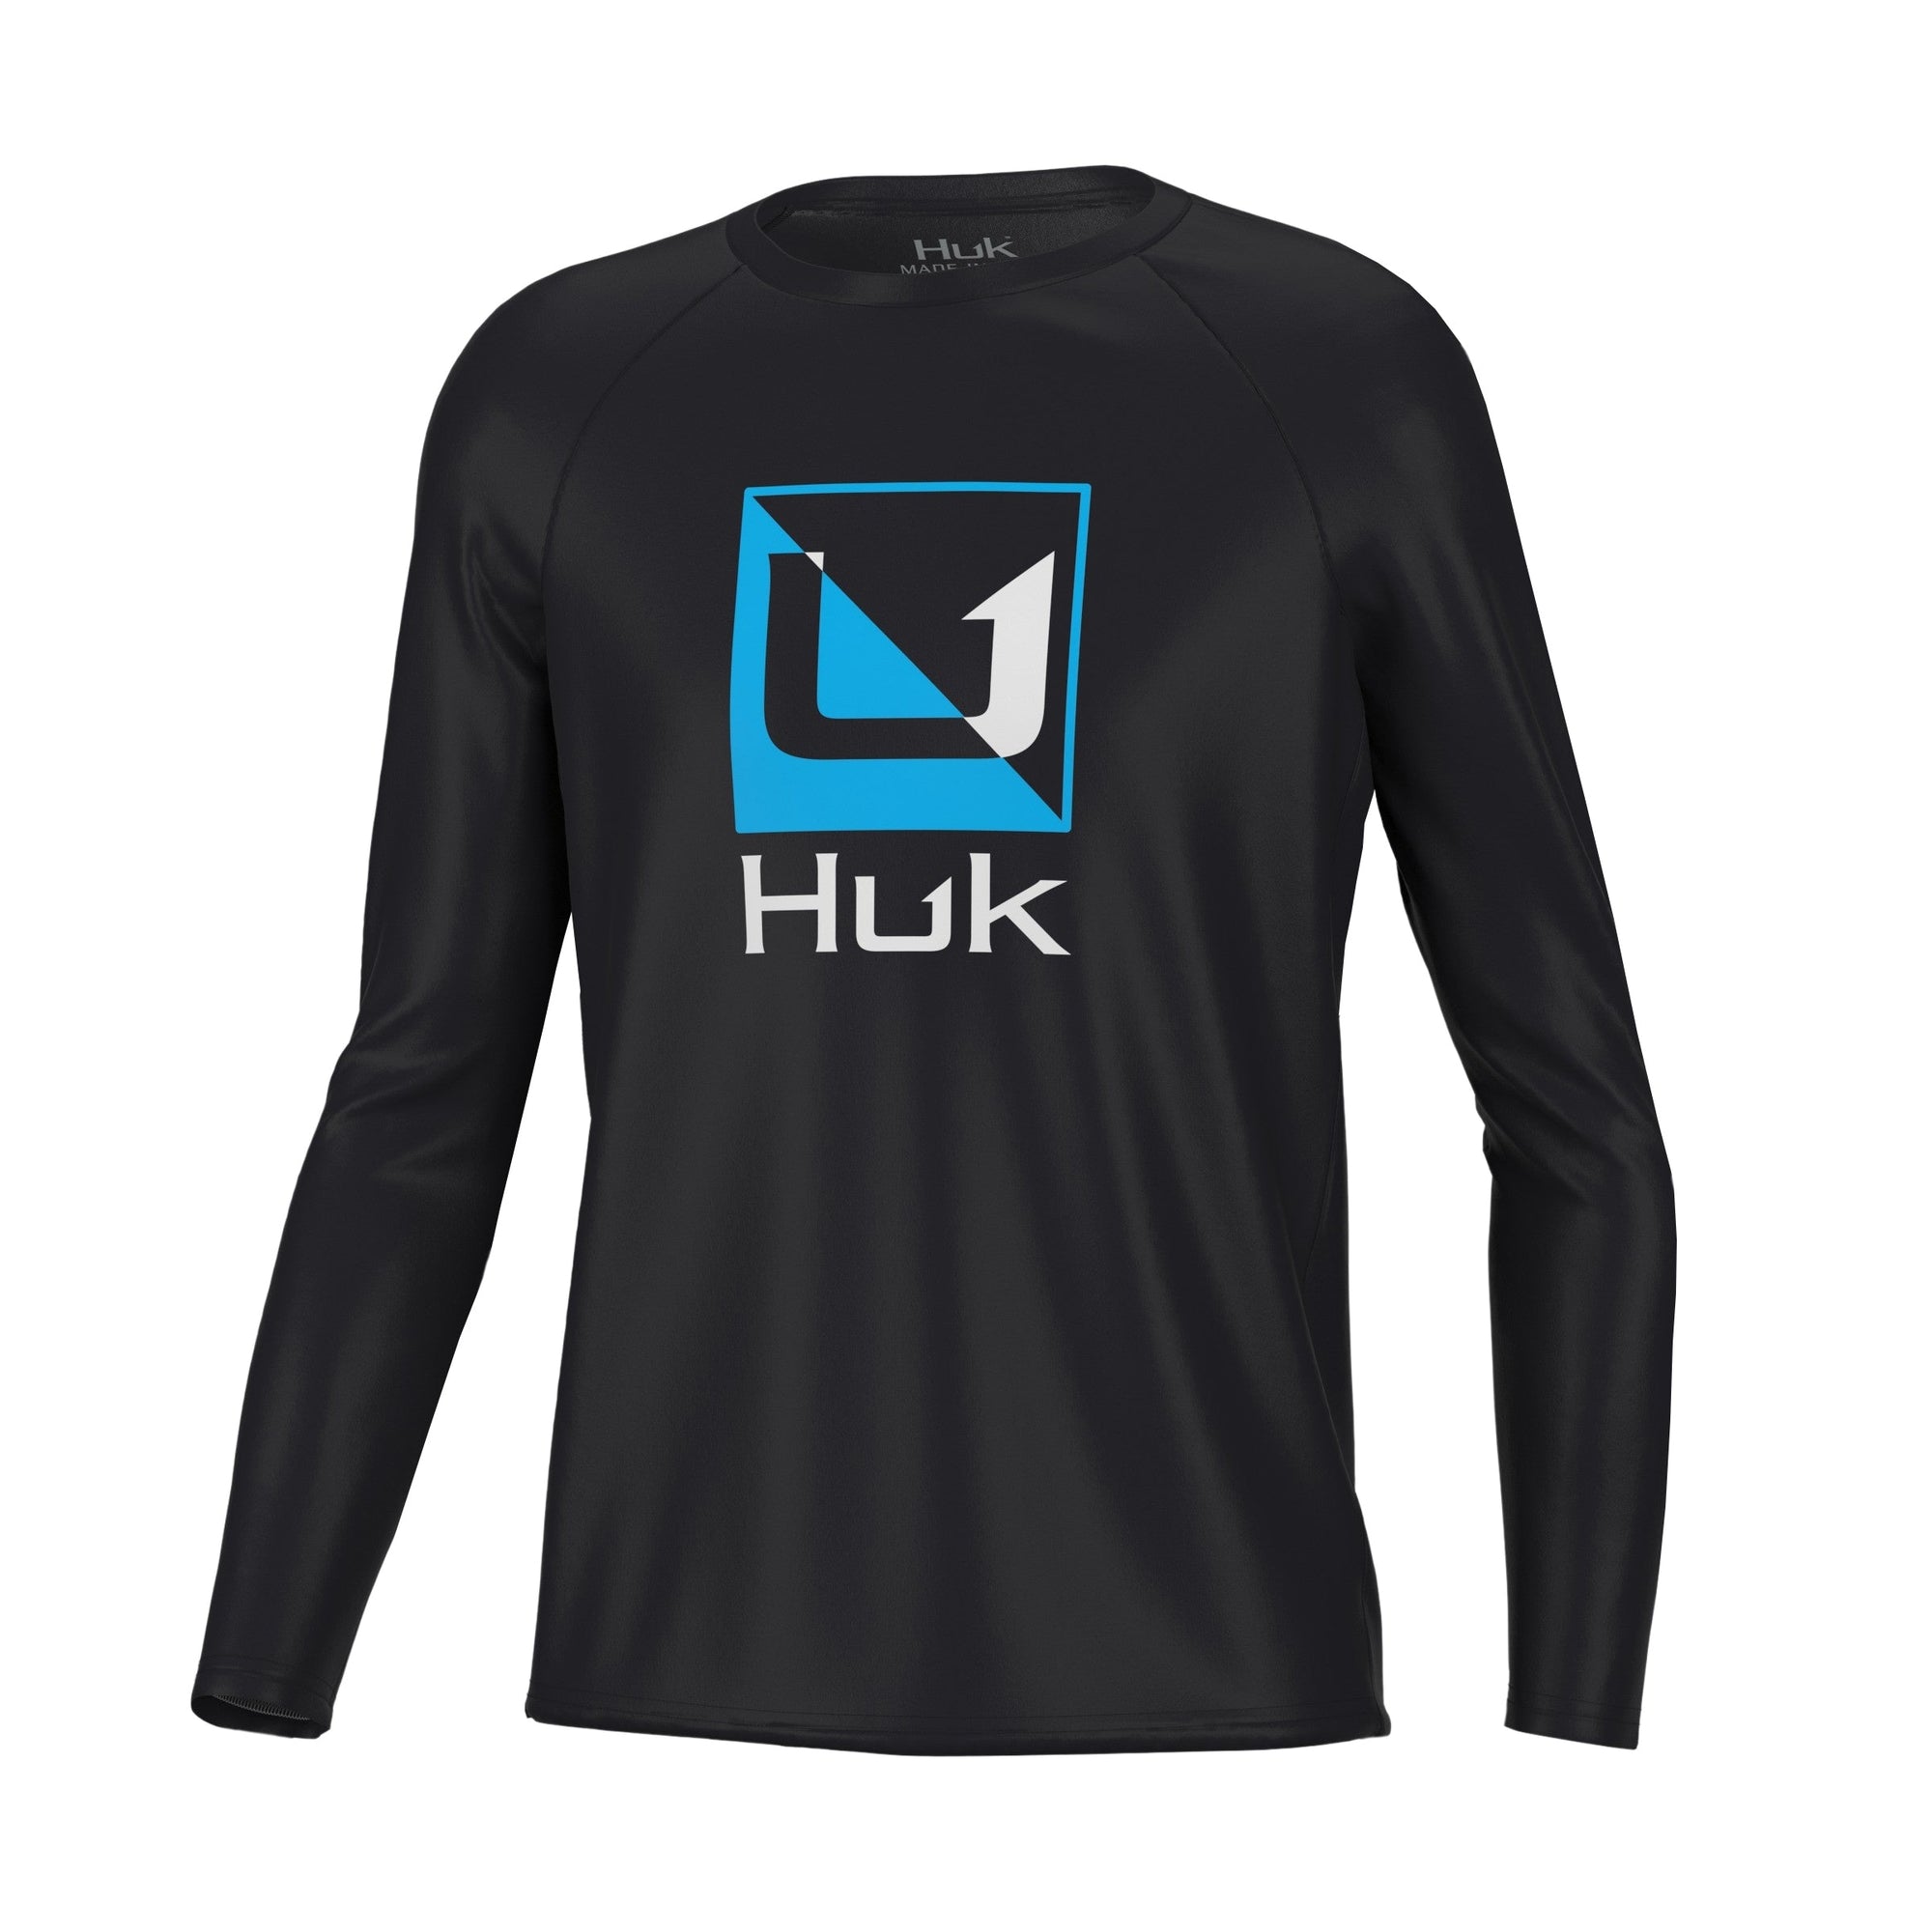 Huk Stamped Gaiter - Offshore from HUK - CHAOS Fishing